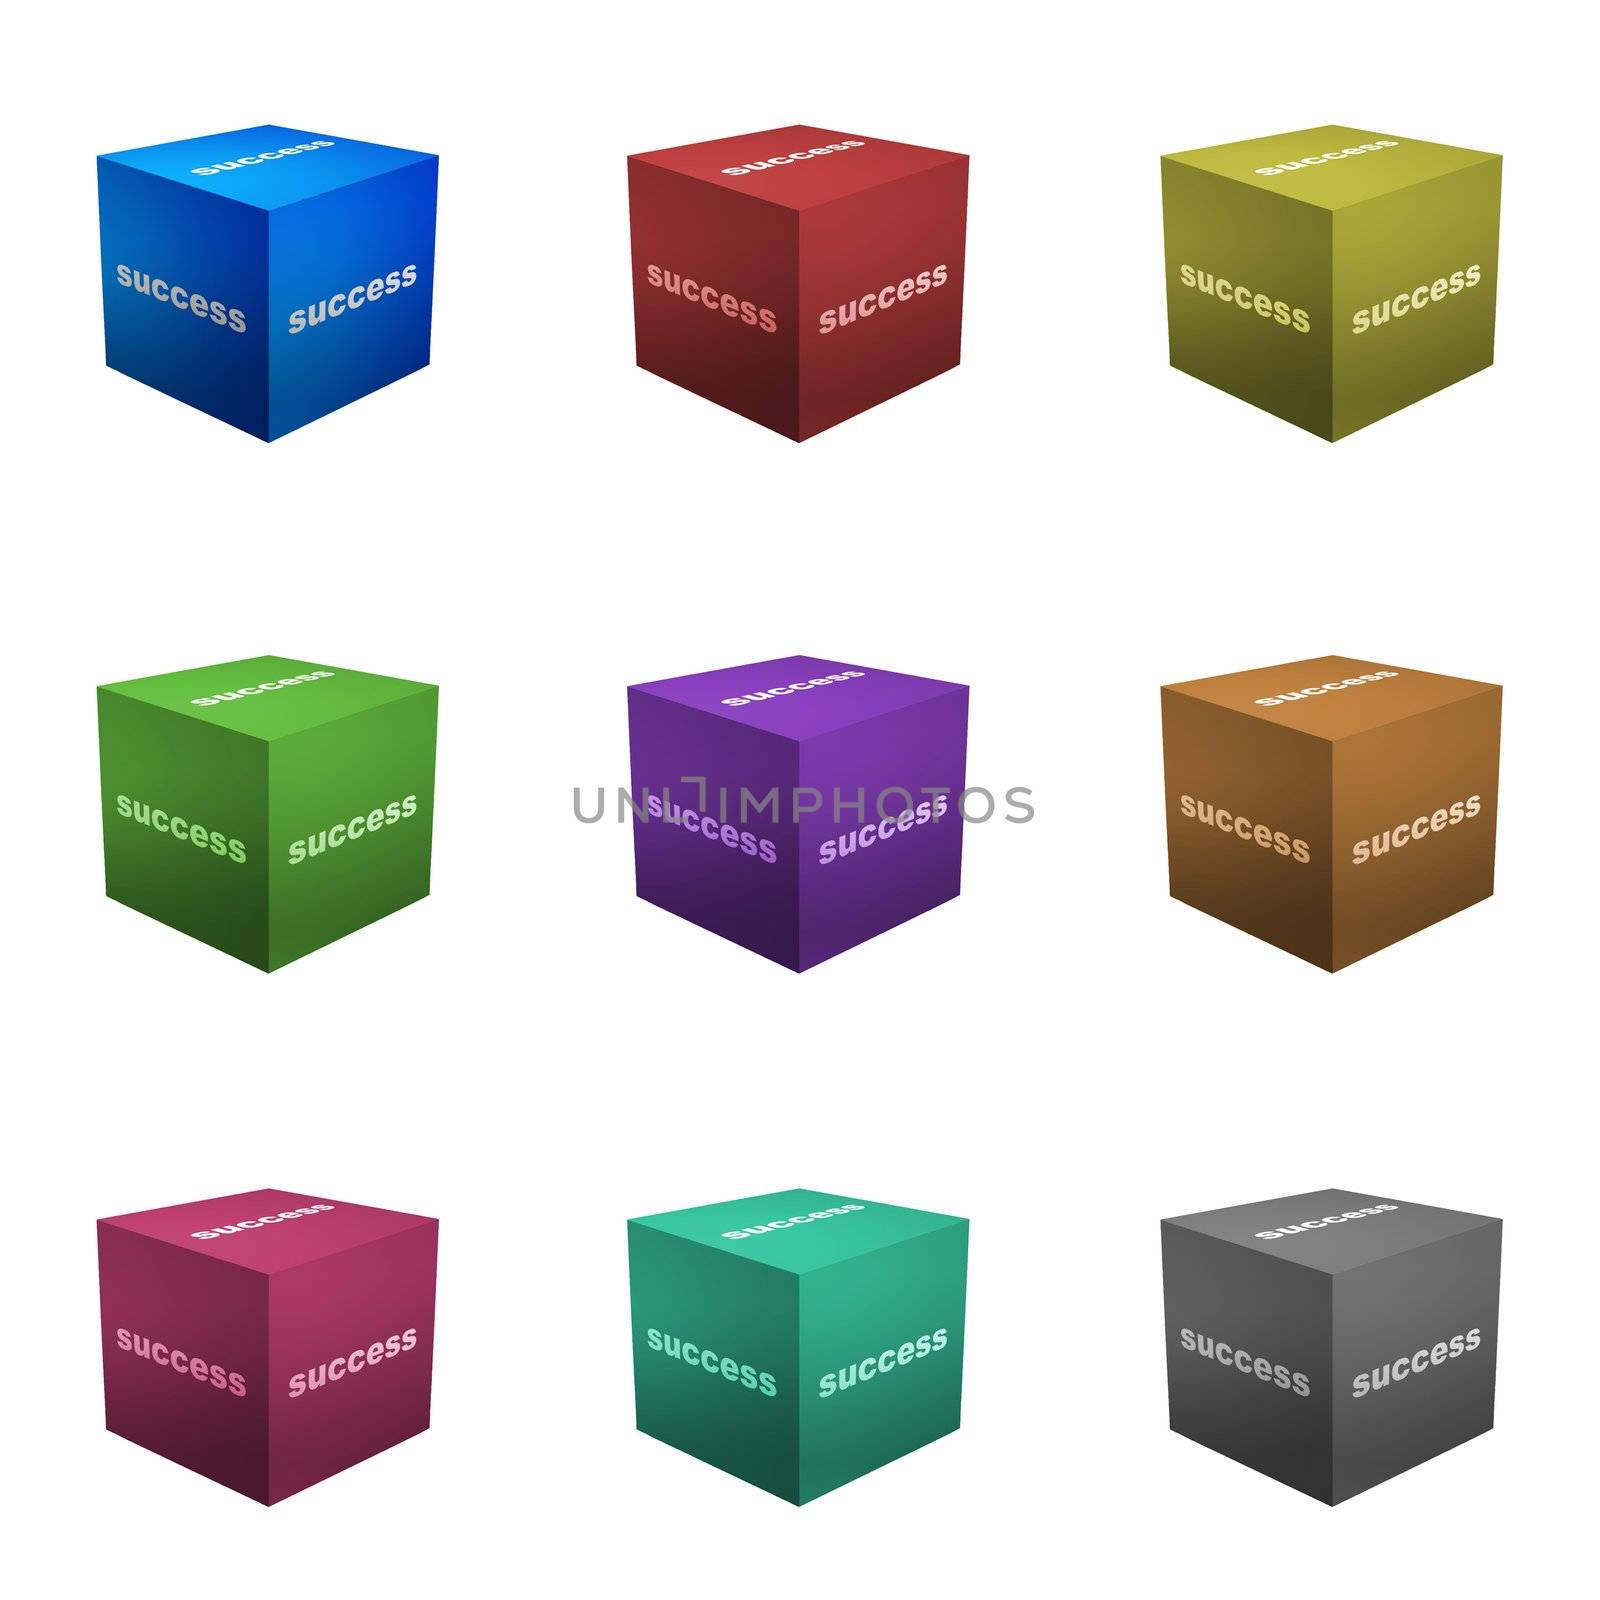 Success Boxes in 3d Cube Format Isolated on White